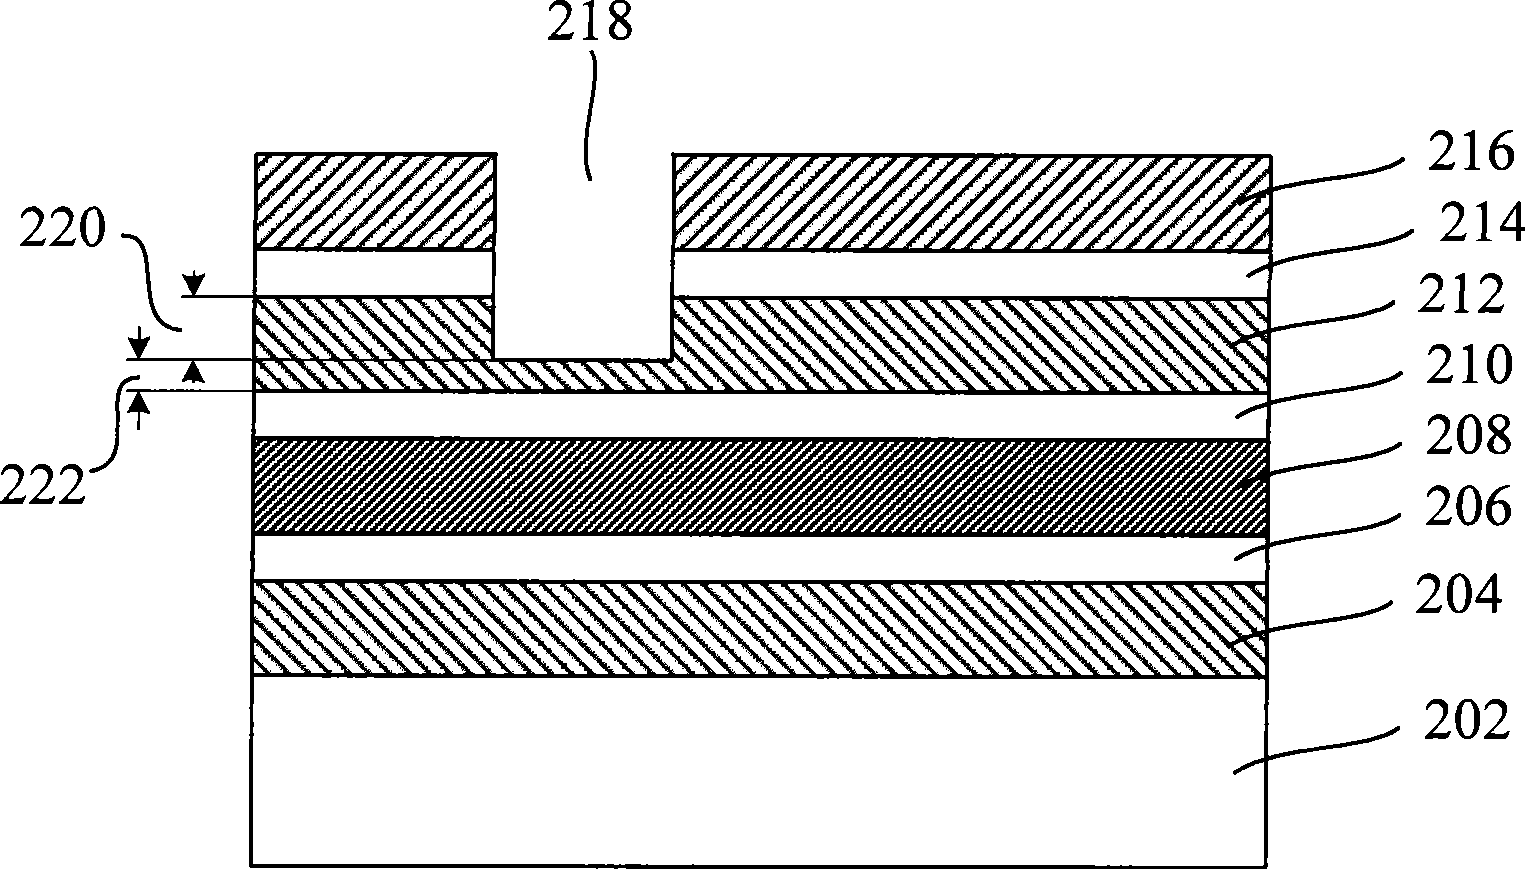 Connection pore forming method